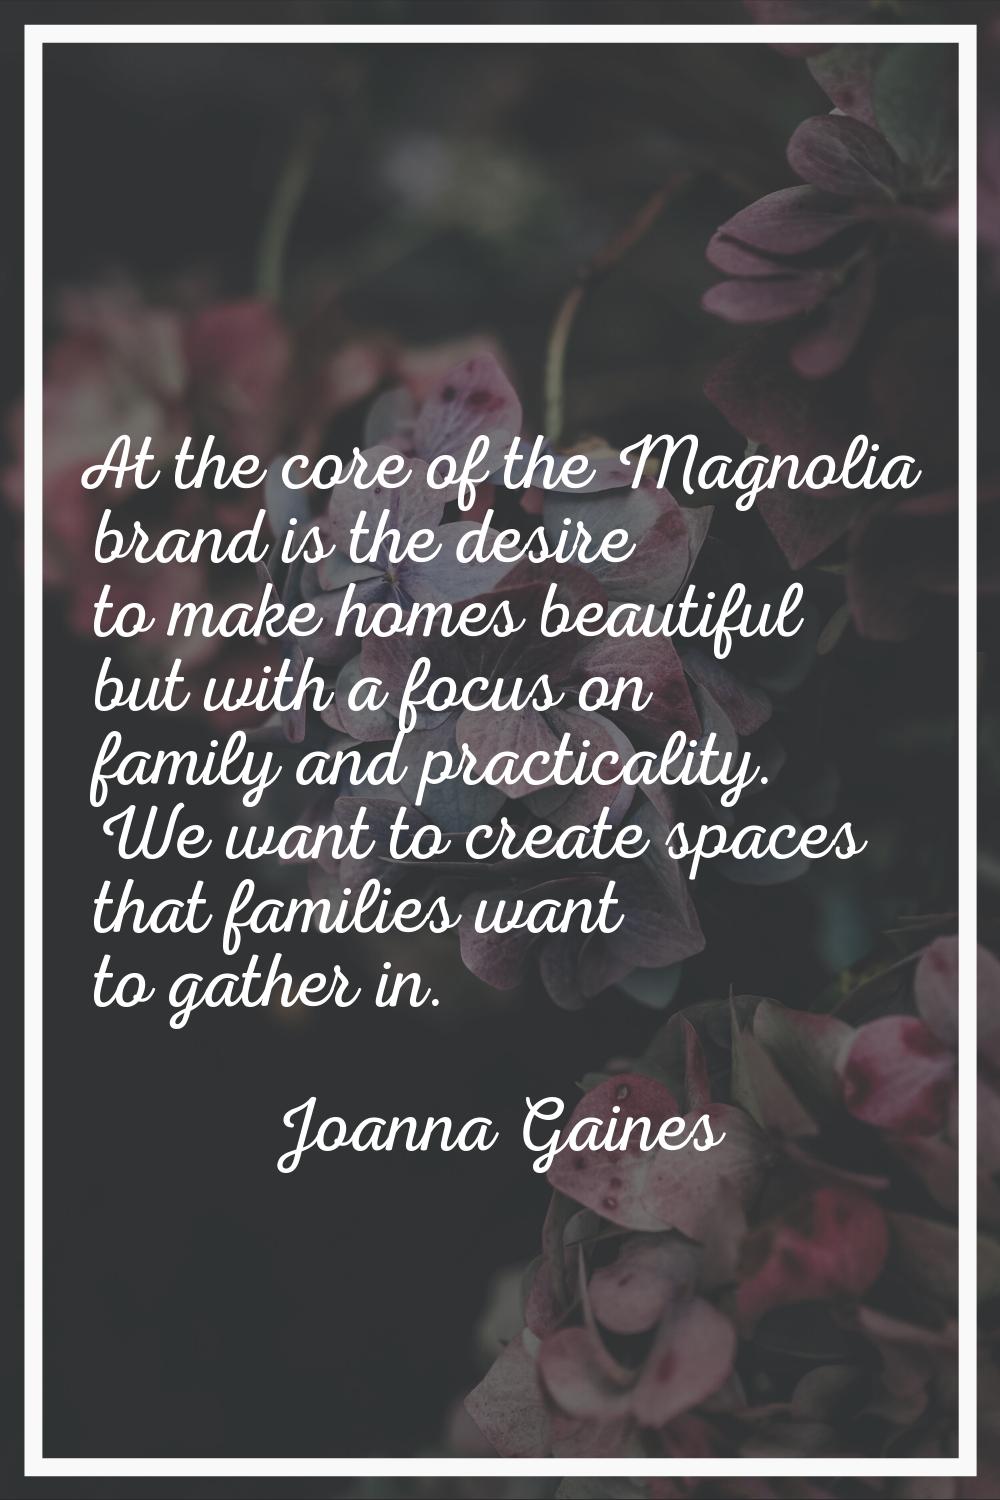 At the core of the Magnolia brand is the desire to make homes beautiful but with a focus on family 